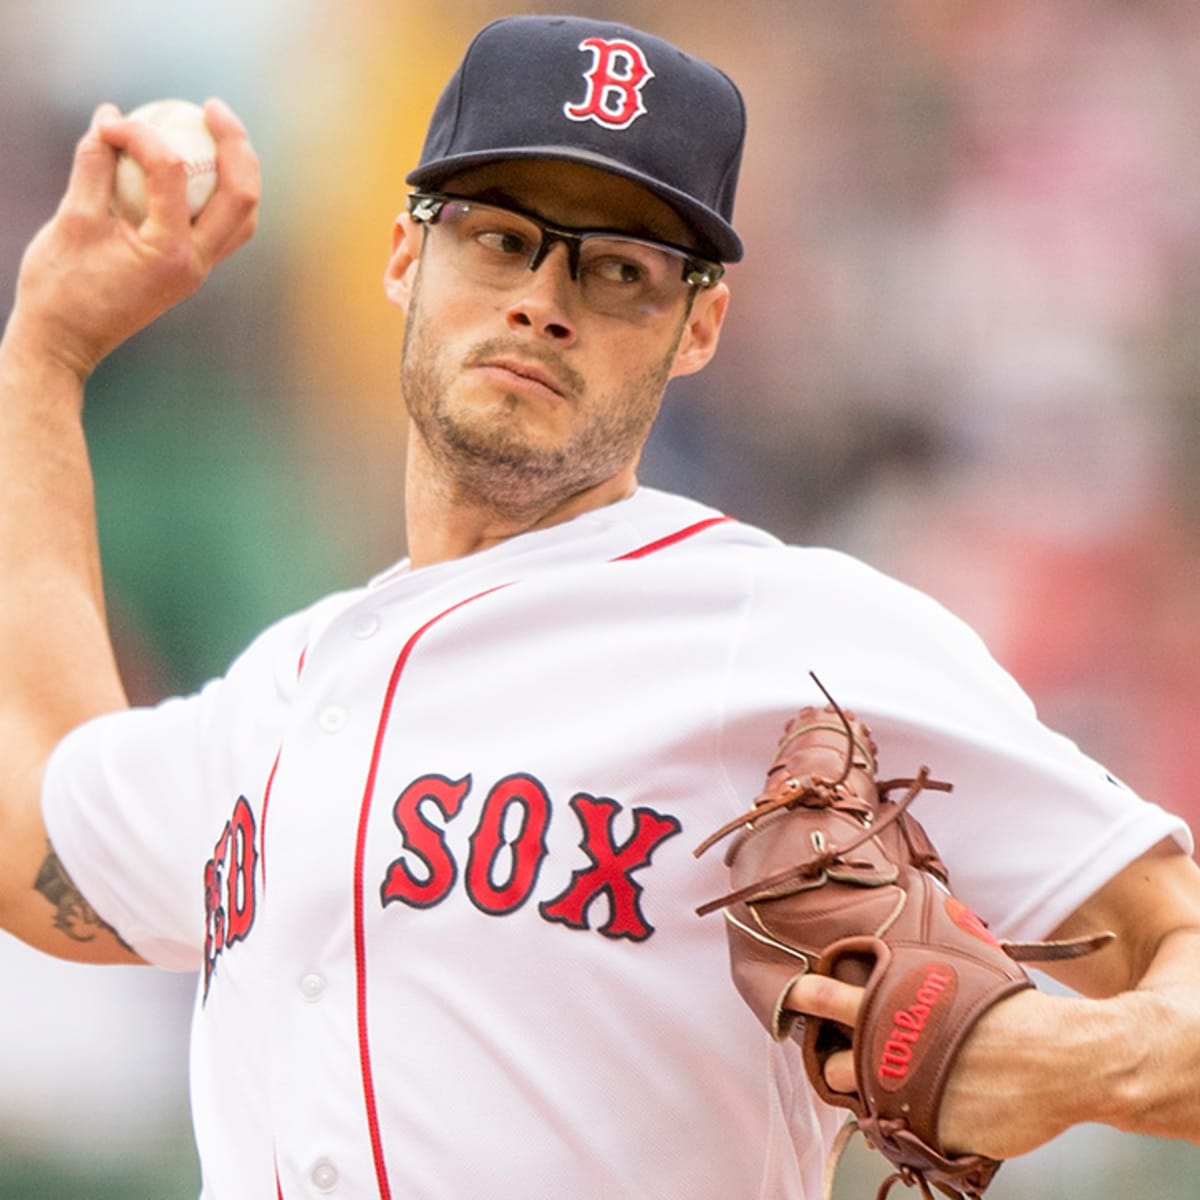 Joe Kelly shows off his style with 